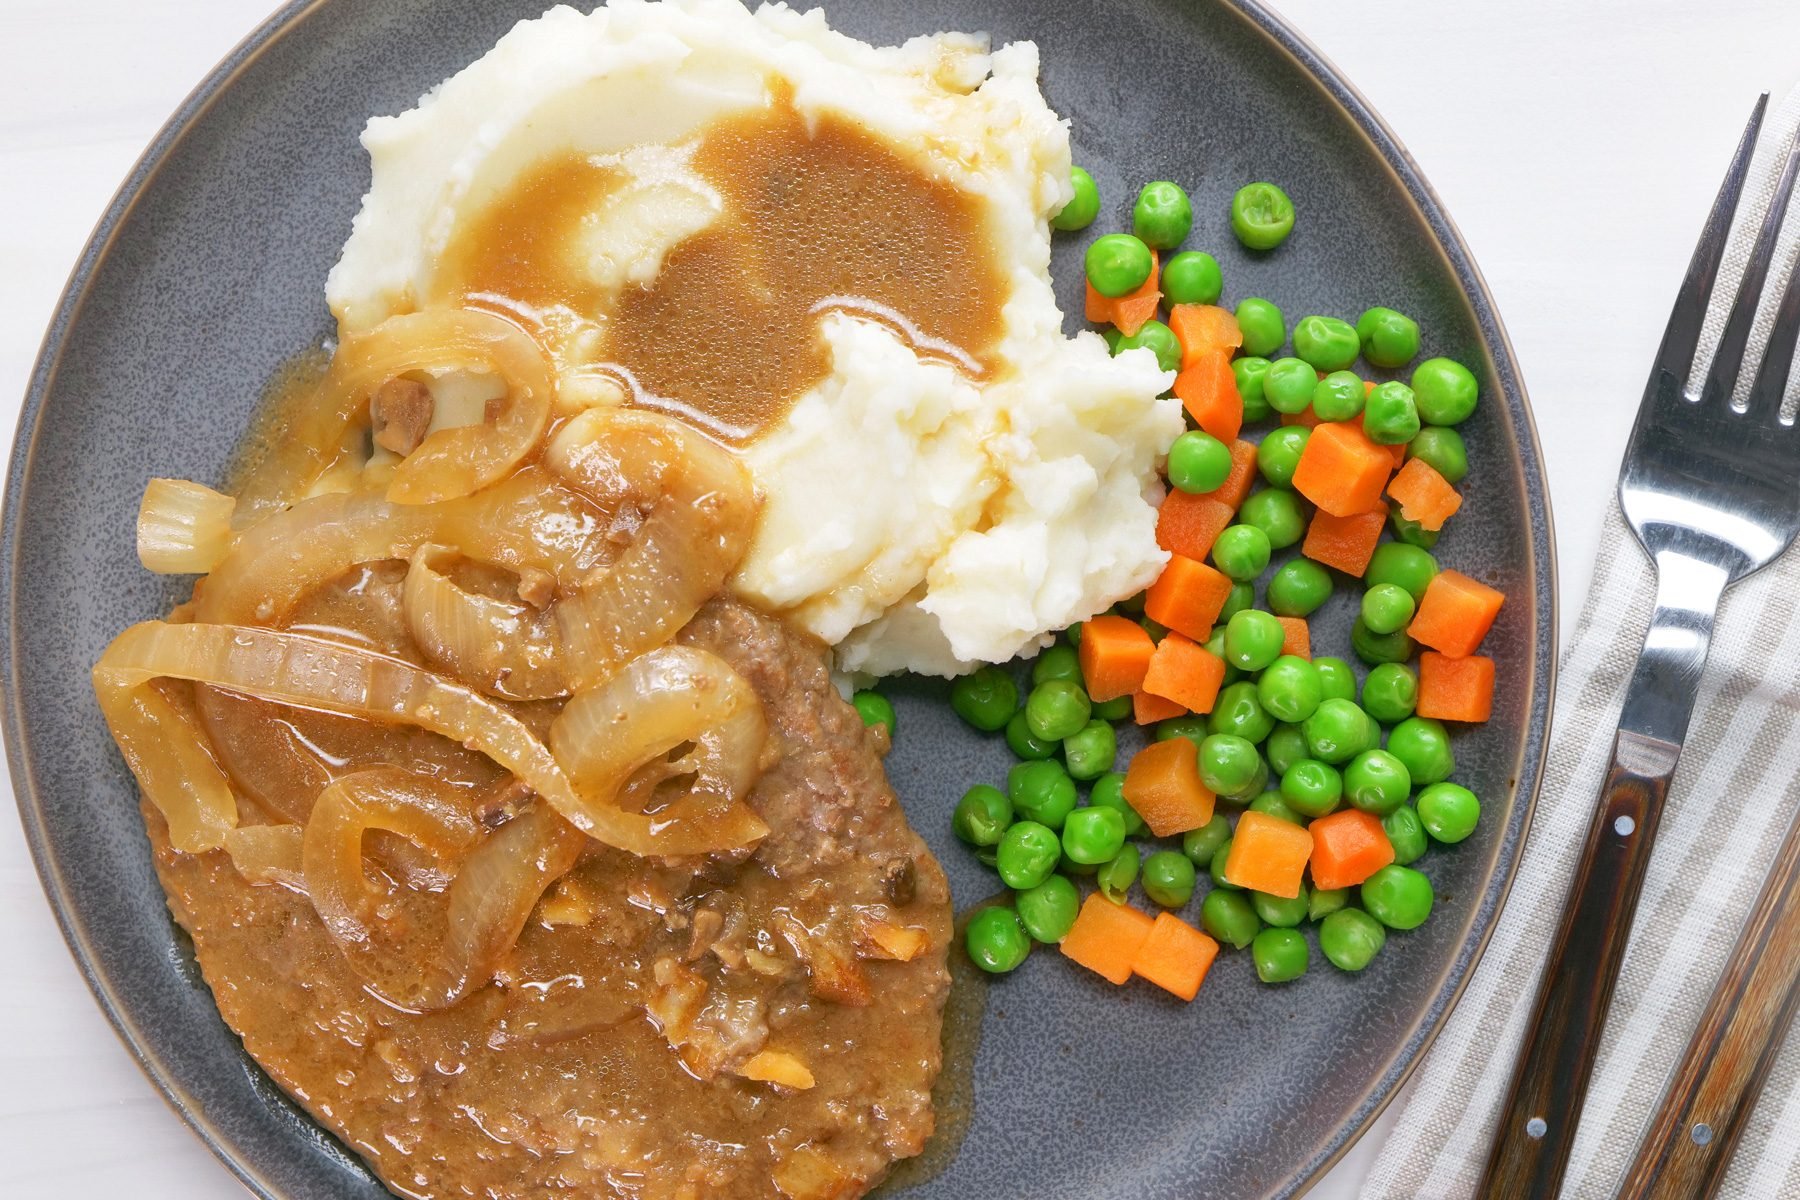 A plate of cube steaks with gravy served over mashed potatoes along with boiled peas and carrot cubes